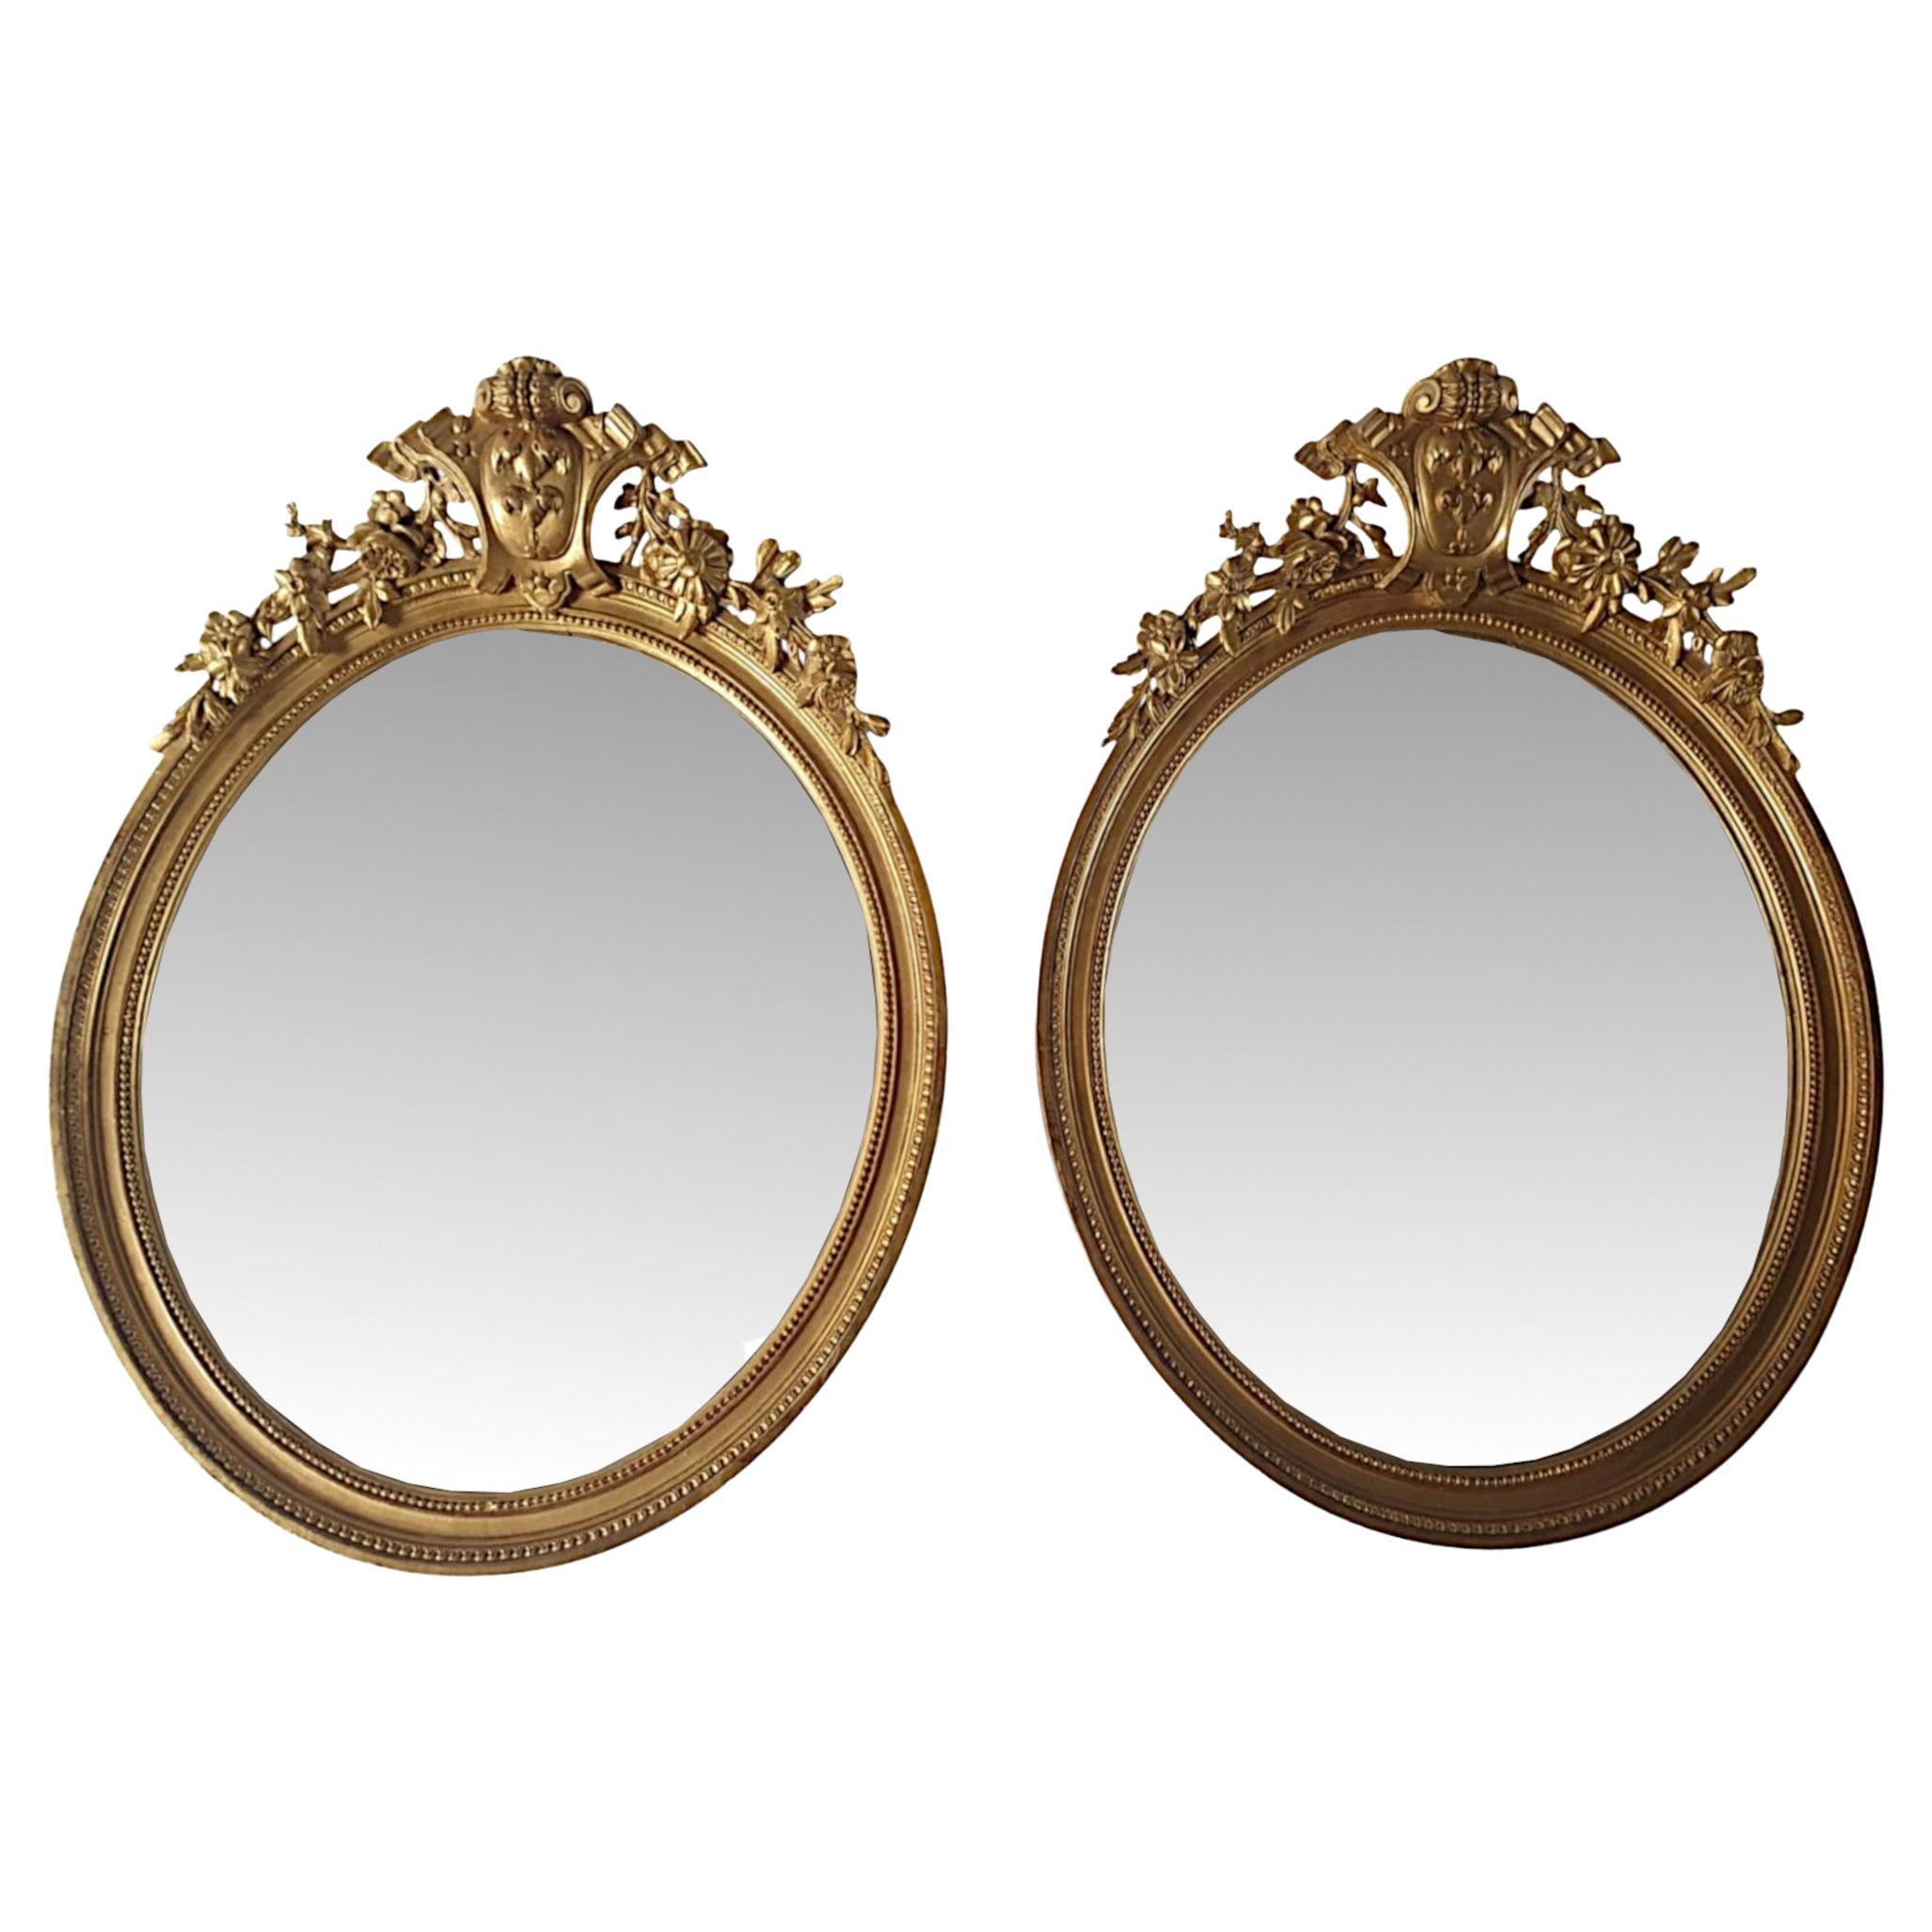 A Very Rare and Fine Pair of 19th Century Giltwood Pier Mirrors For Sale